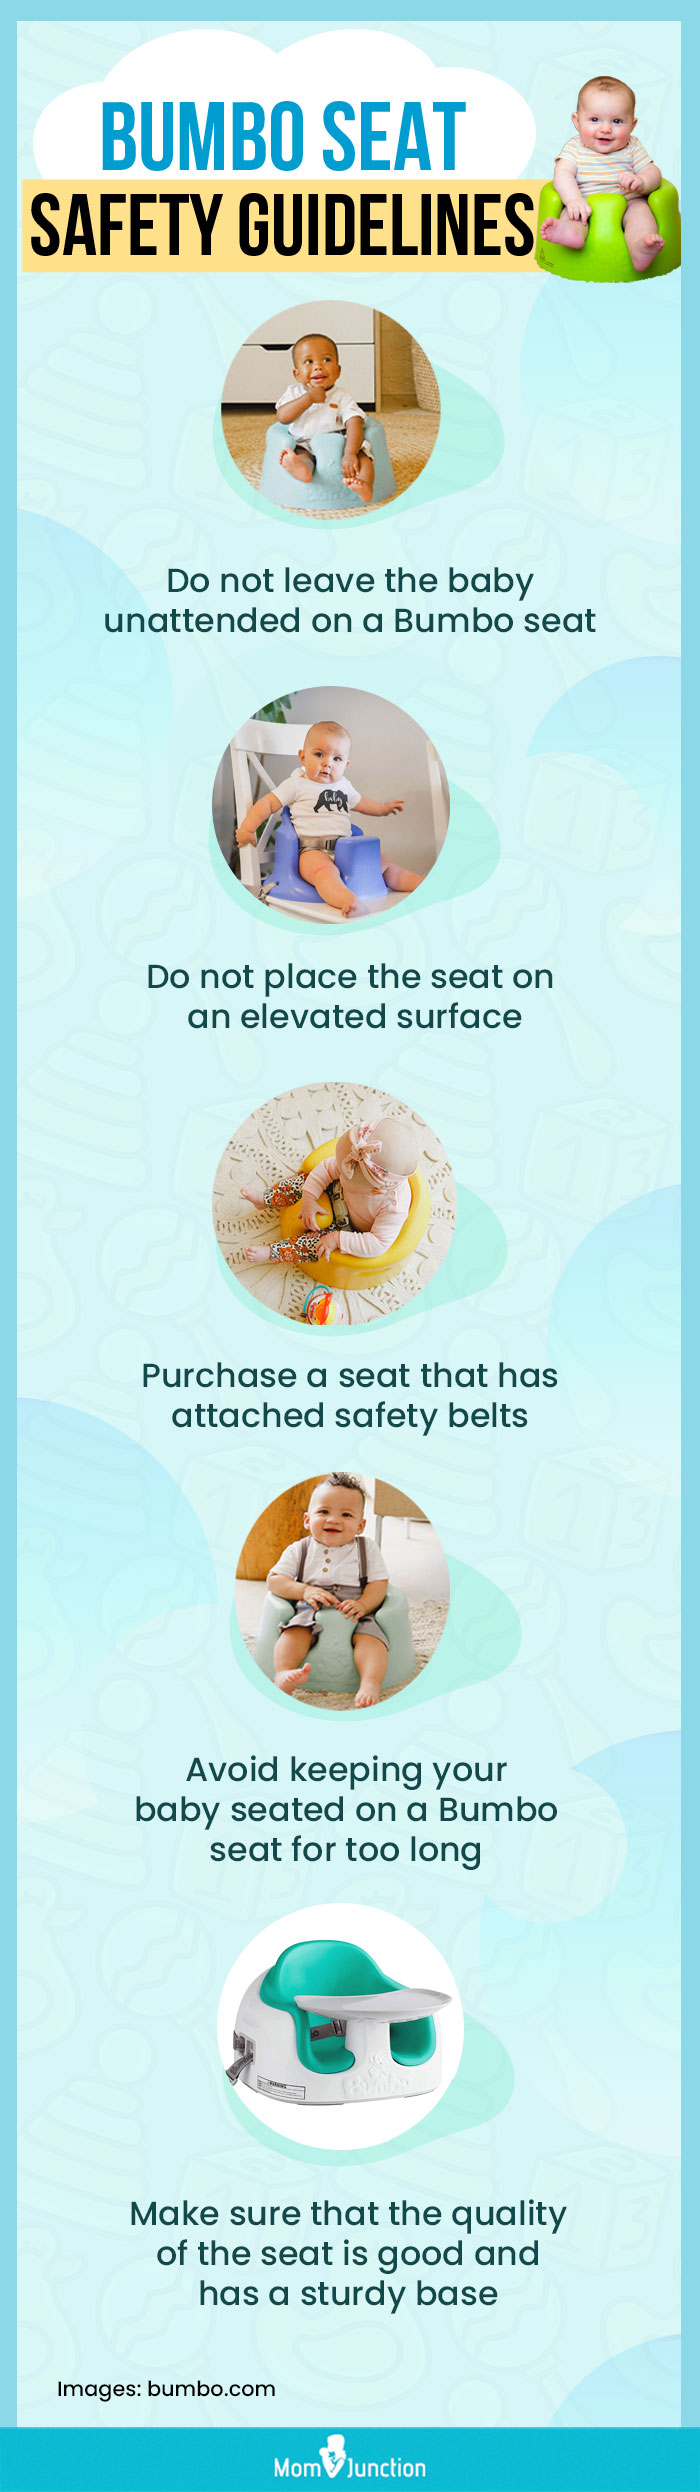 bumbo seat safety guidelines for babies (infographic)